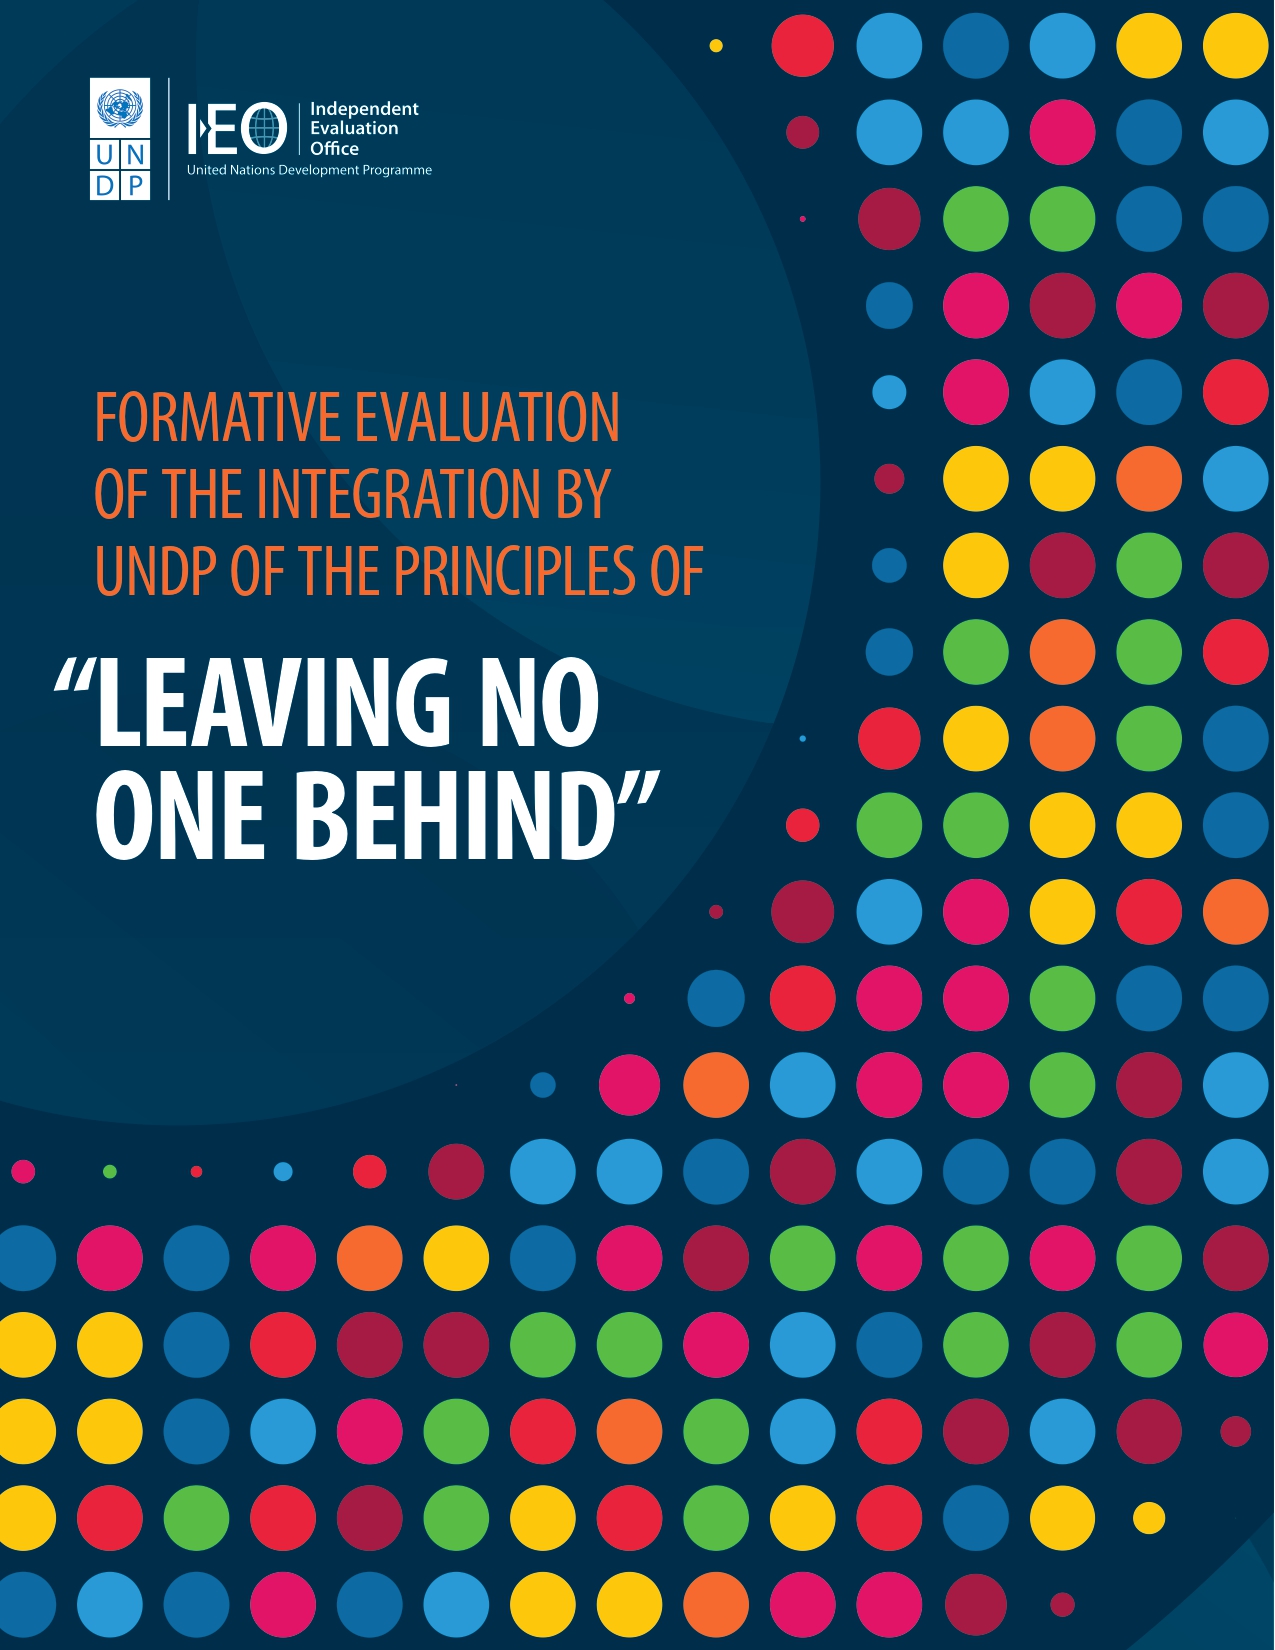 Formative Evaluation of the Integration by UNDP of the principles of Leaving No One Behind